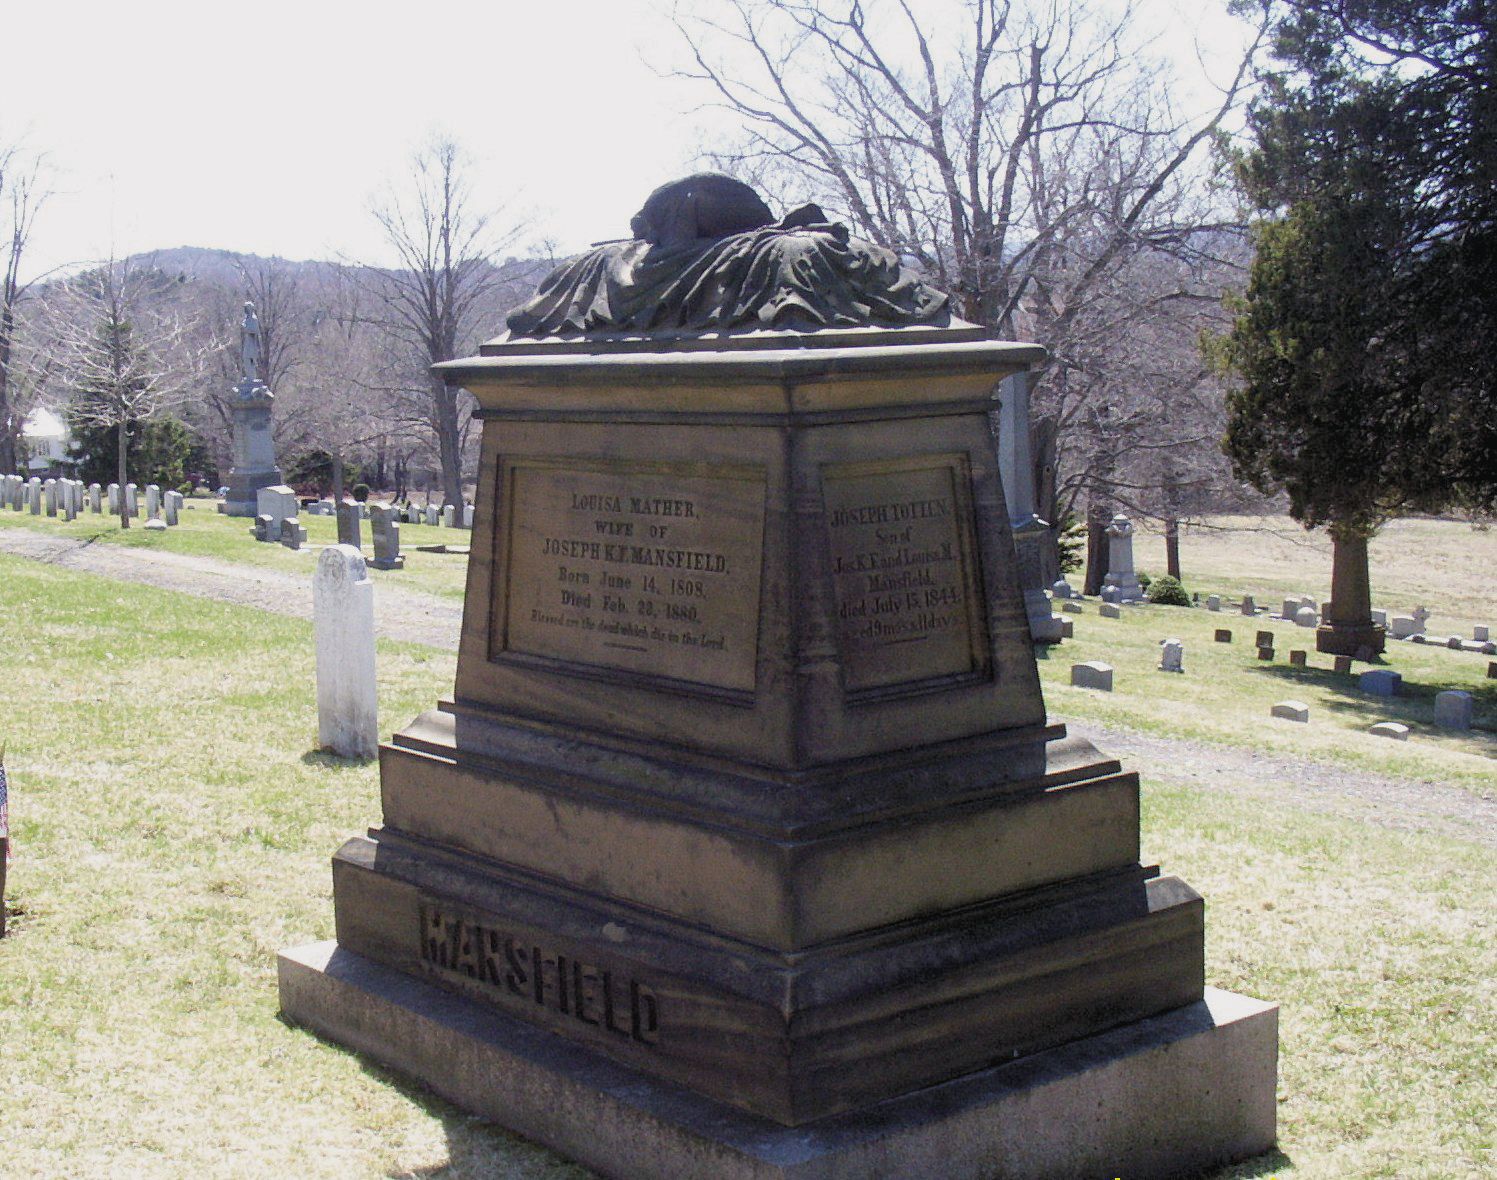 Mansfield’s grave. He was the oldest general killed in the war.